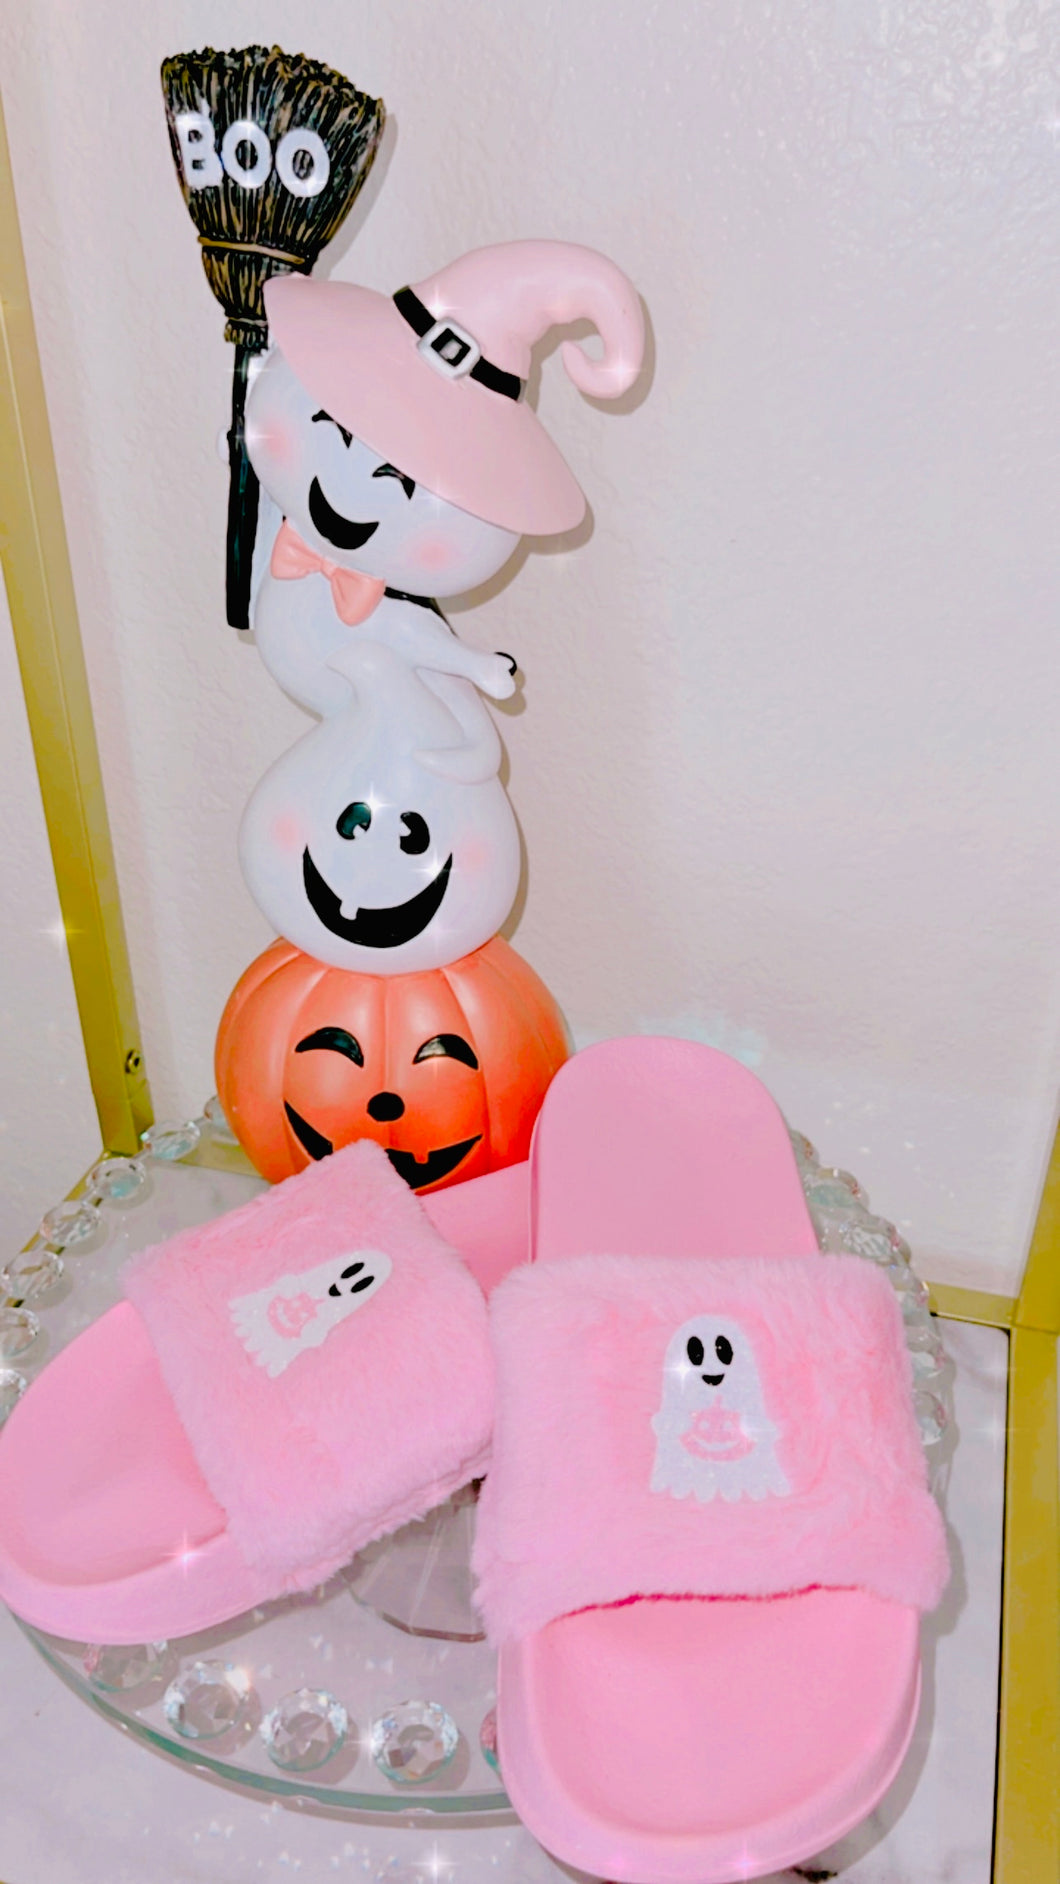 Ghost holding pumpkin slippers